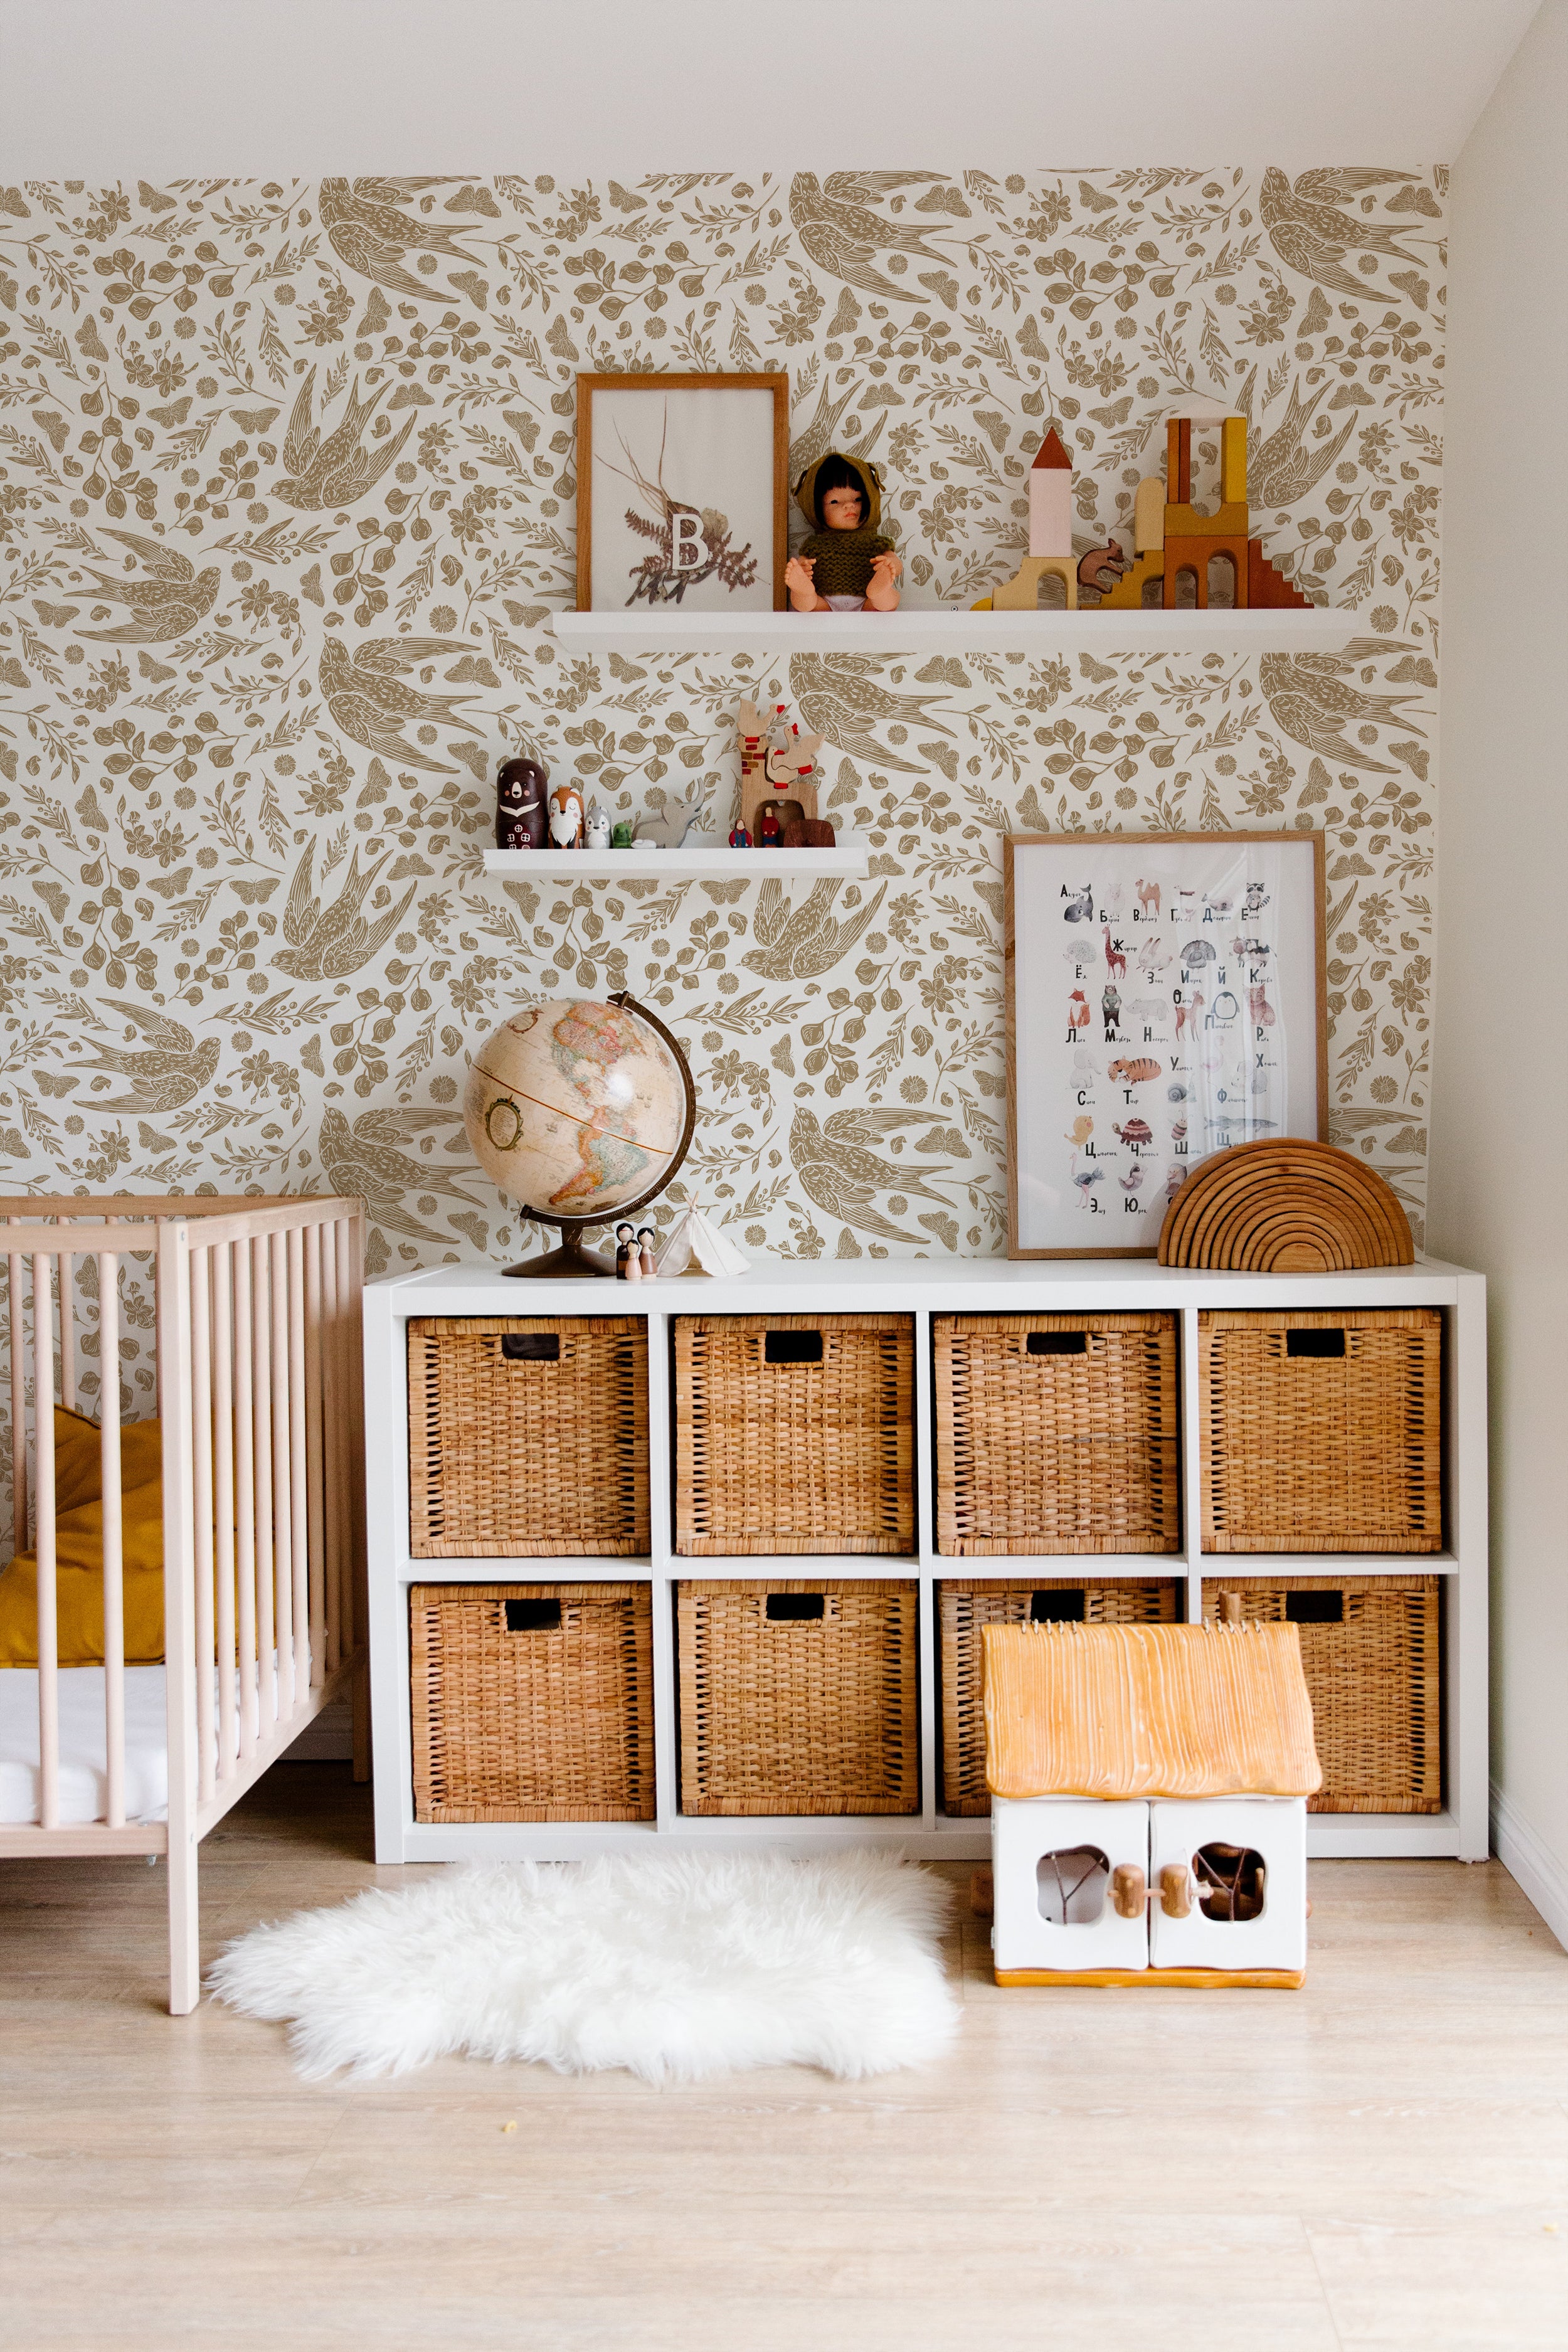 A cozy nursery room corner featuring Vintage Swift Wallpaper with elegant golden bird and foliage illustrations on a cream background. The room includes a crib, a shelf filled with children's toys and books, and a white storage unit with wicker baskets